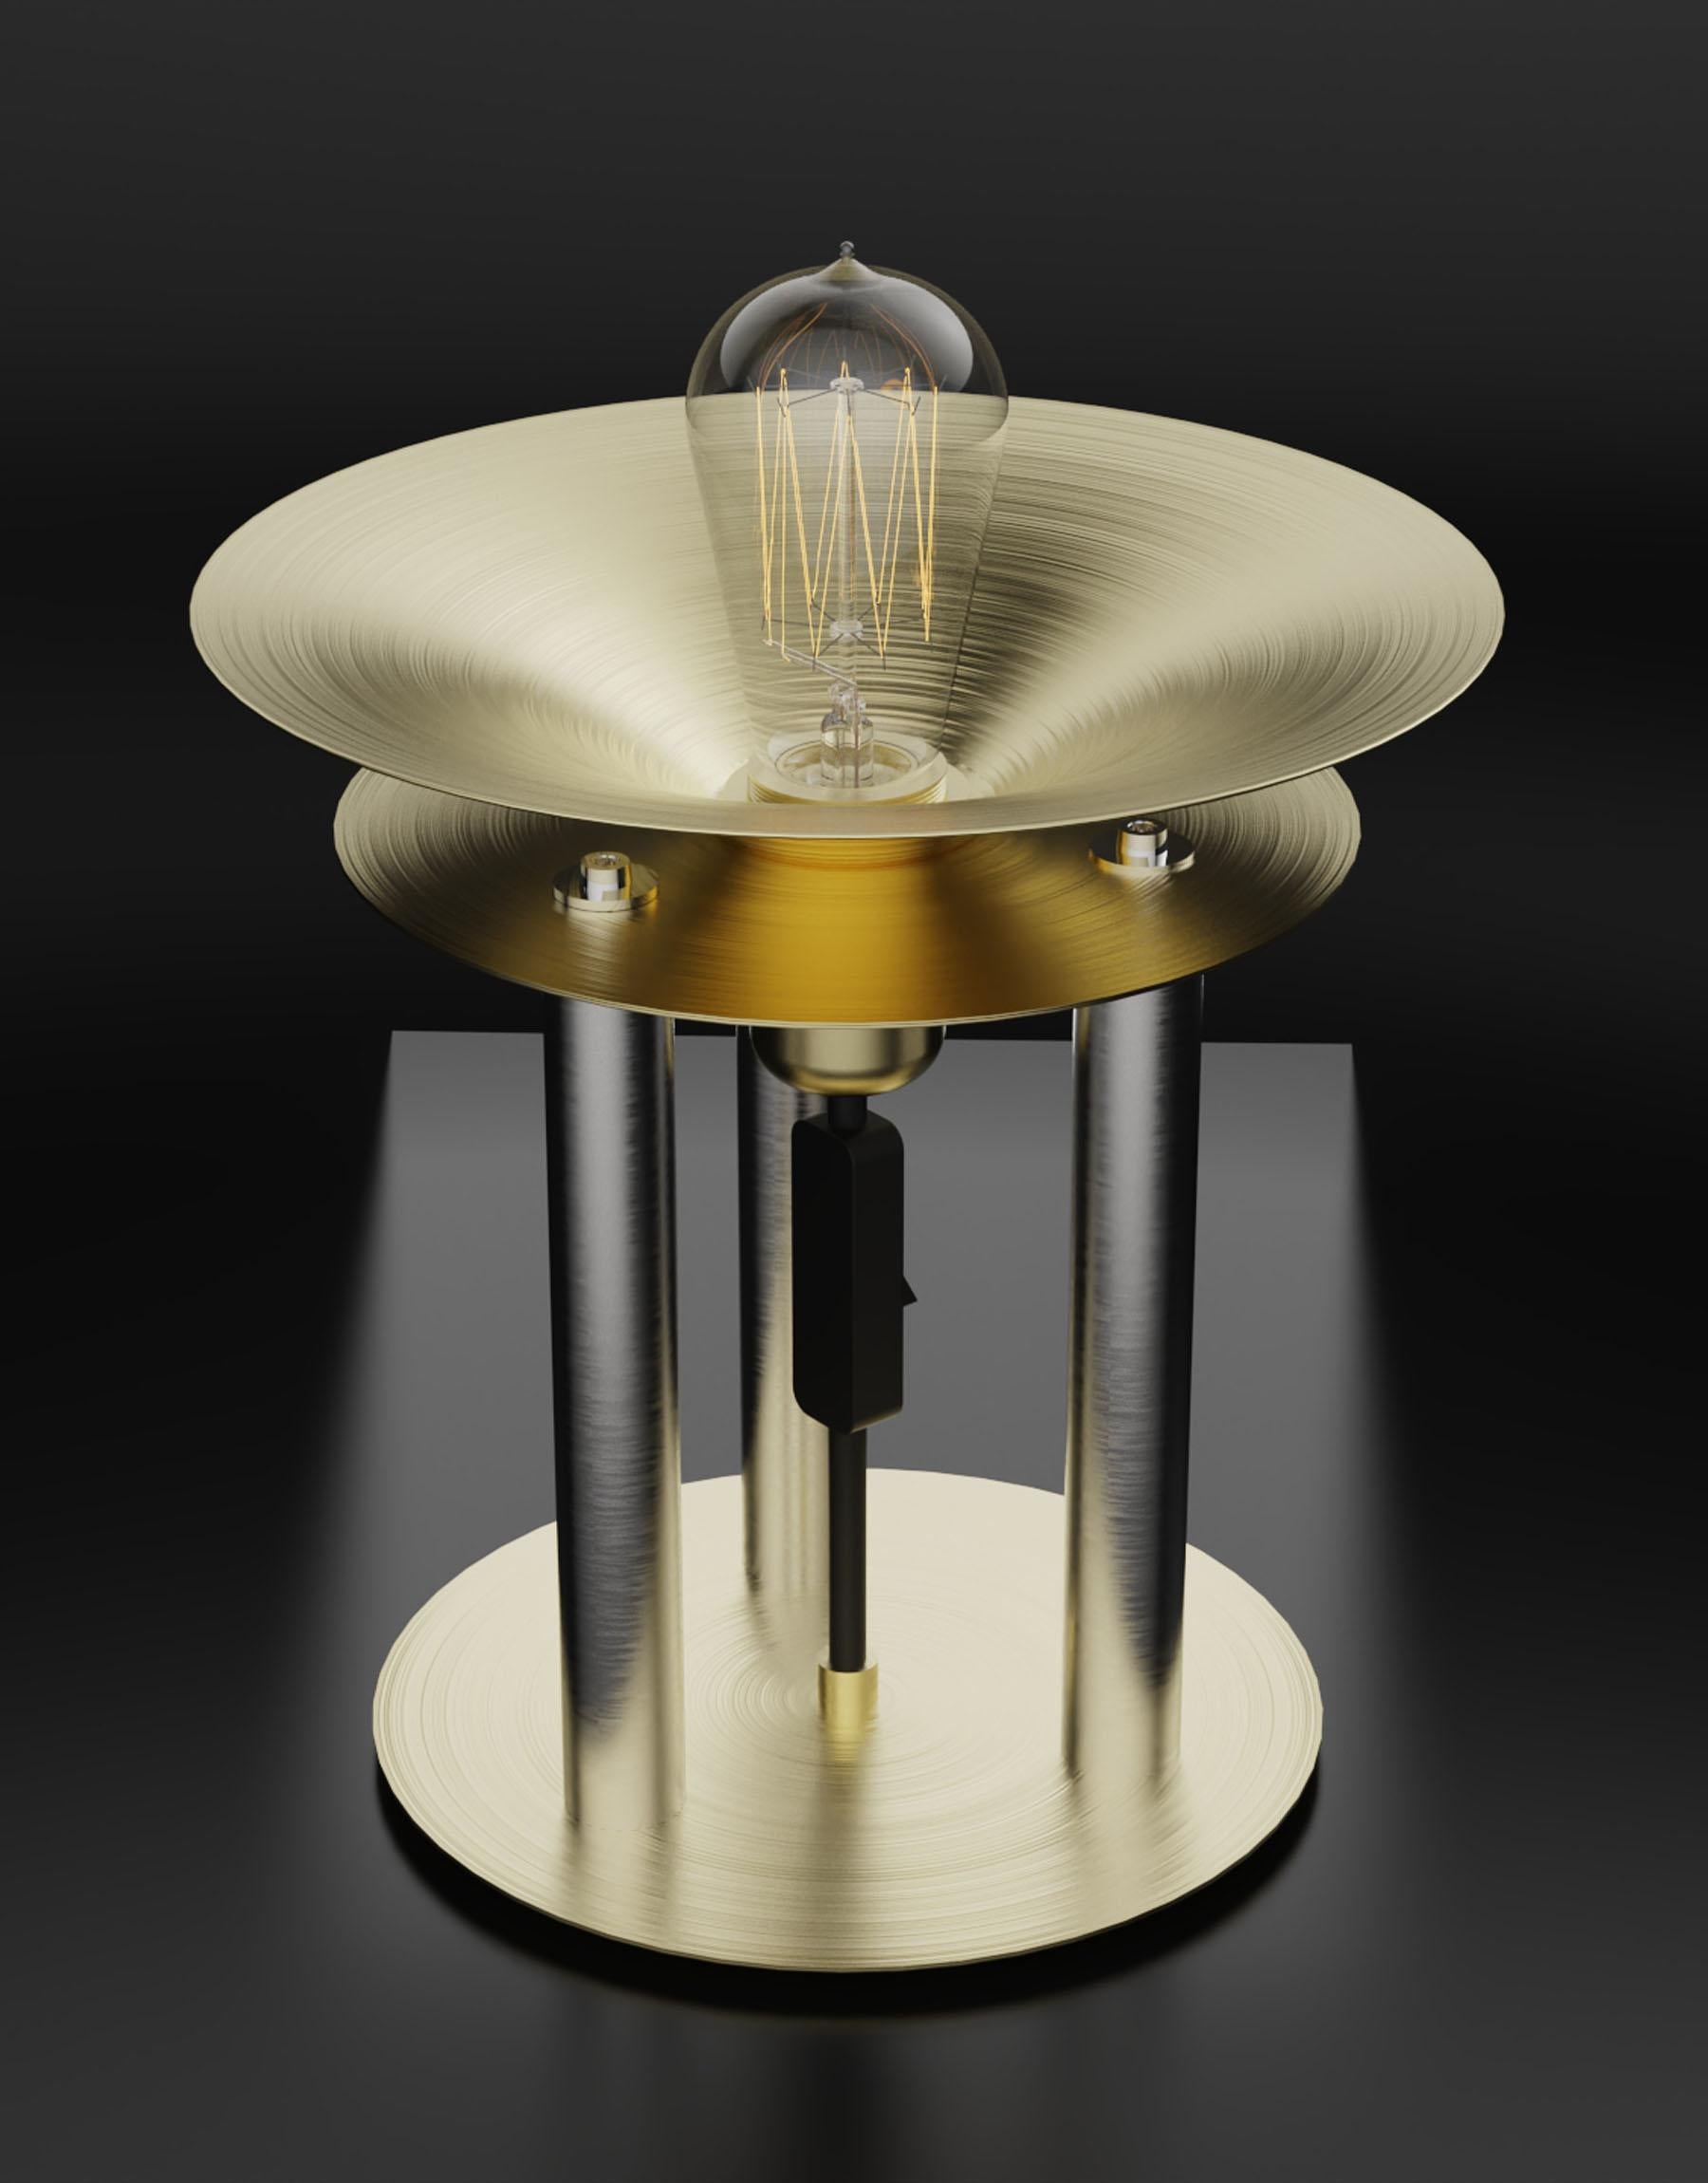 Add a touch of elegance and prestige to your interior with our industrial-style table lamp in genuine brass. This
unique lamp features two 200mm-diameter brass discs linked by three 304L stainless steel pillars, offering
unrivalled durability. The